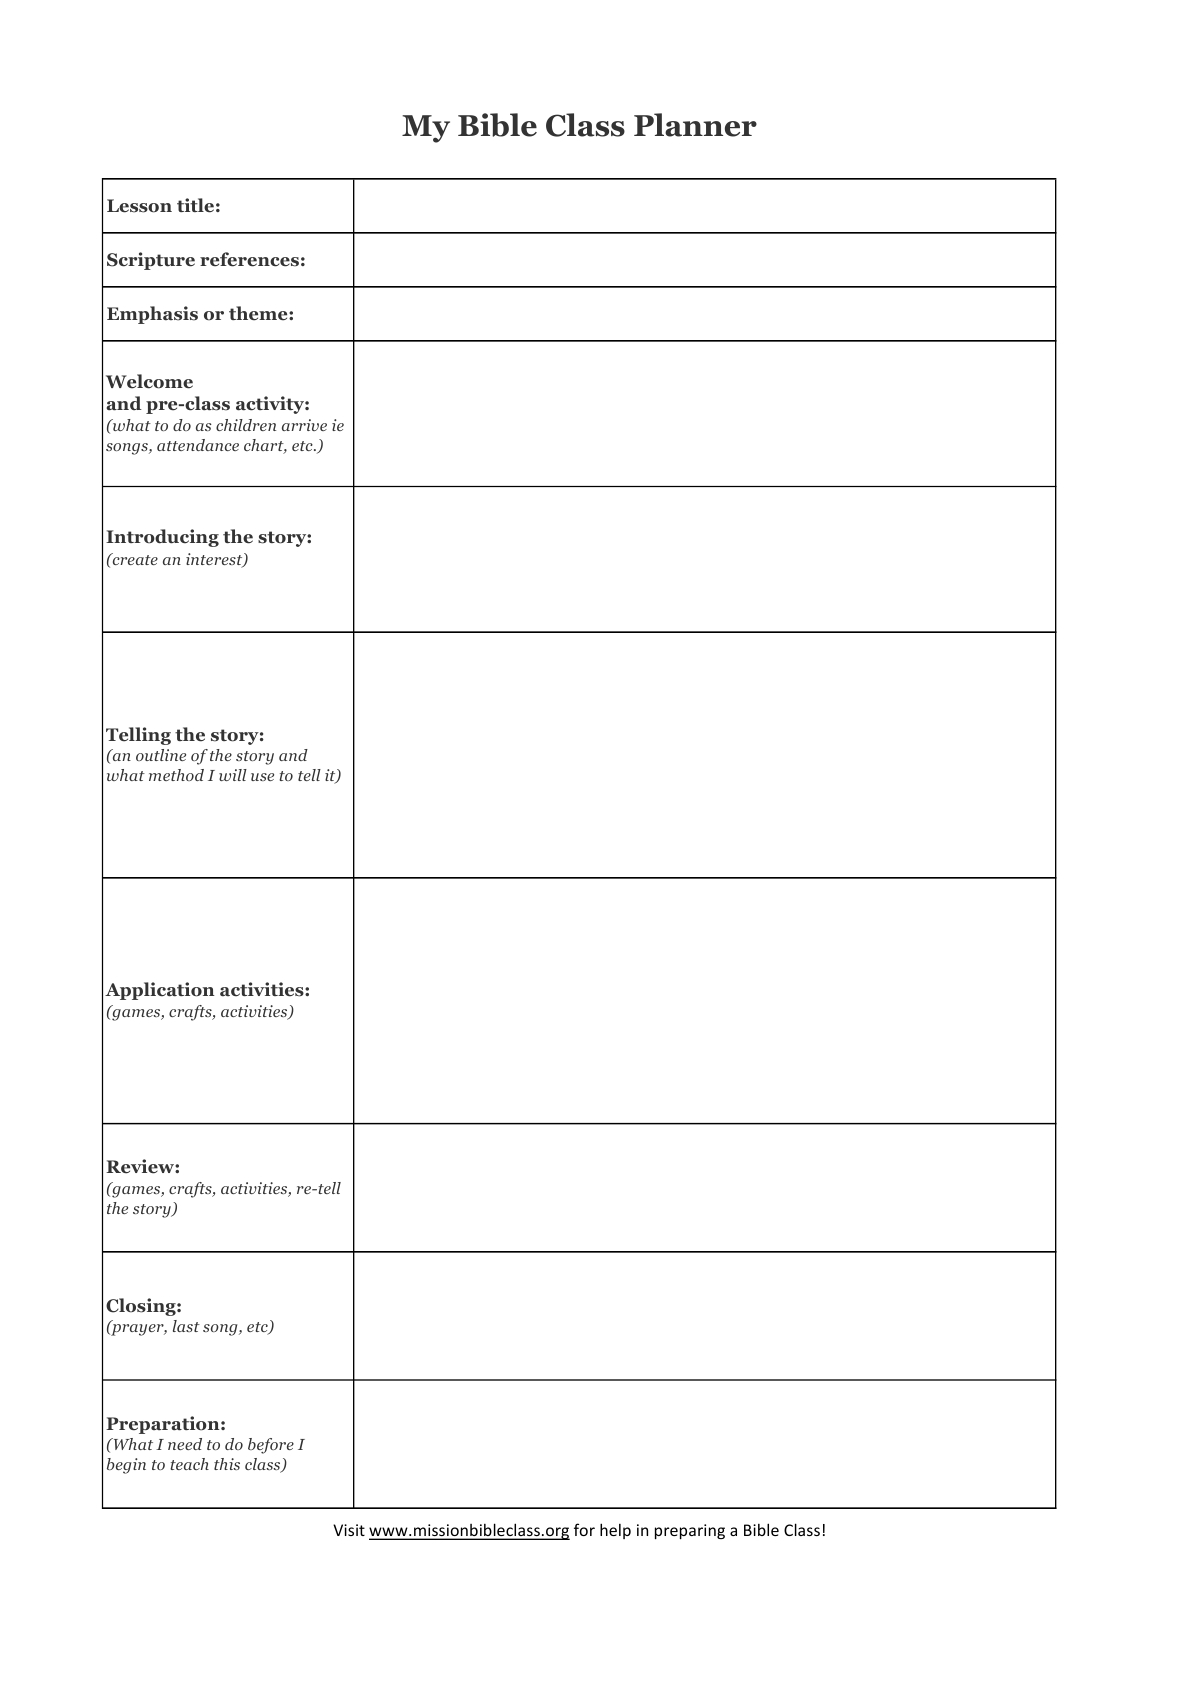 Blank Lesson Plan Templates To Print | Lesson Planning | Blank - Free Printable Sunday School Lessons For Youth